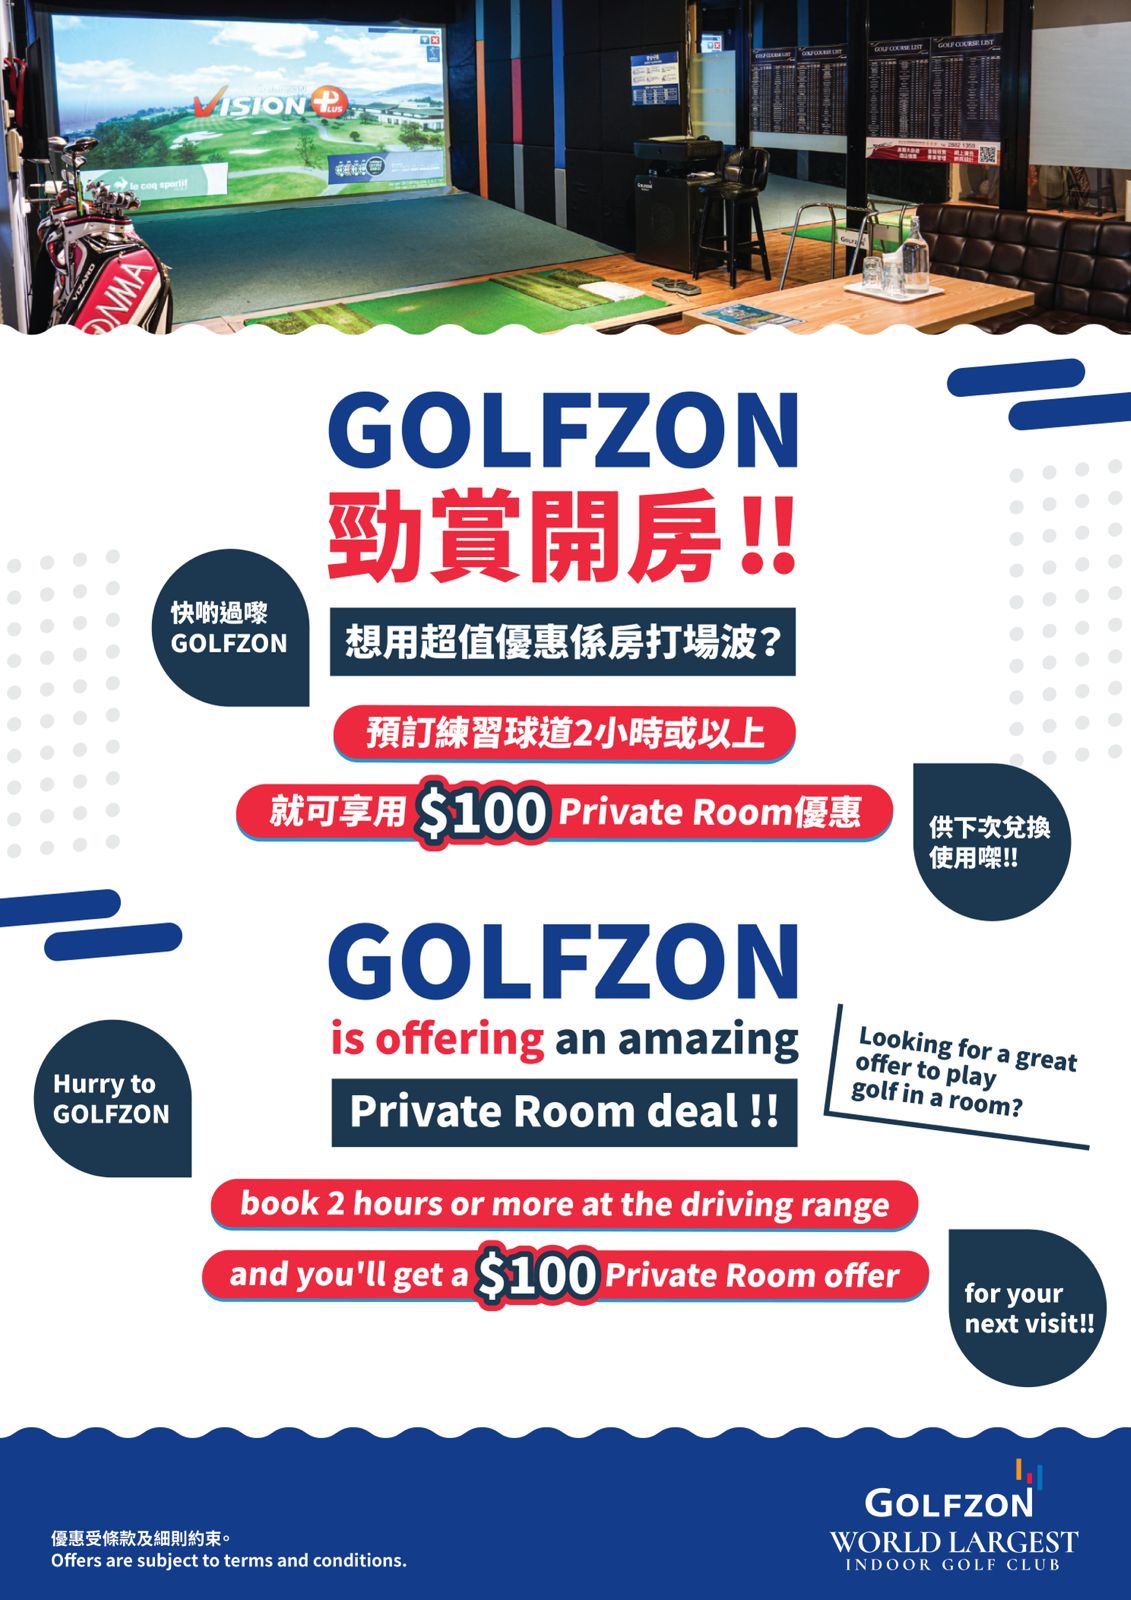 $100 Private Room 超值優惠